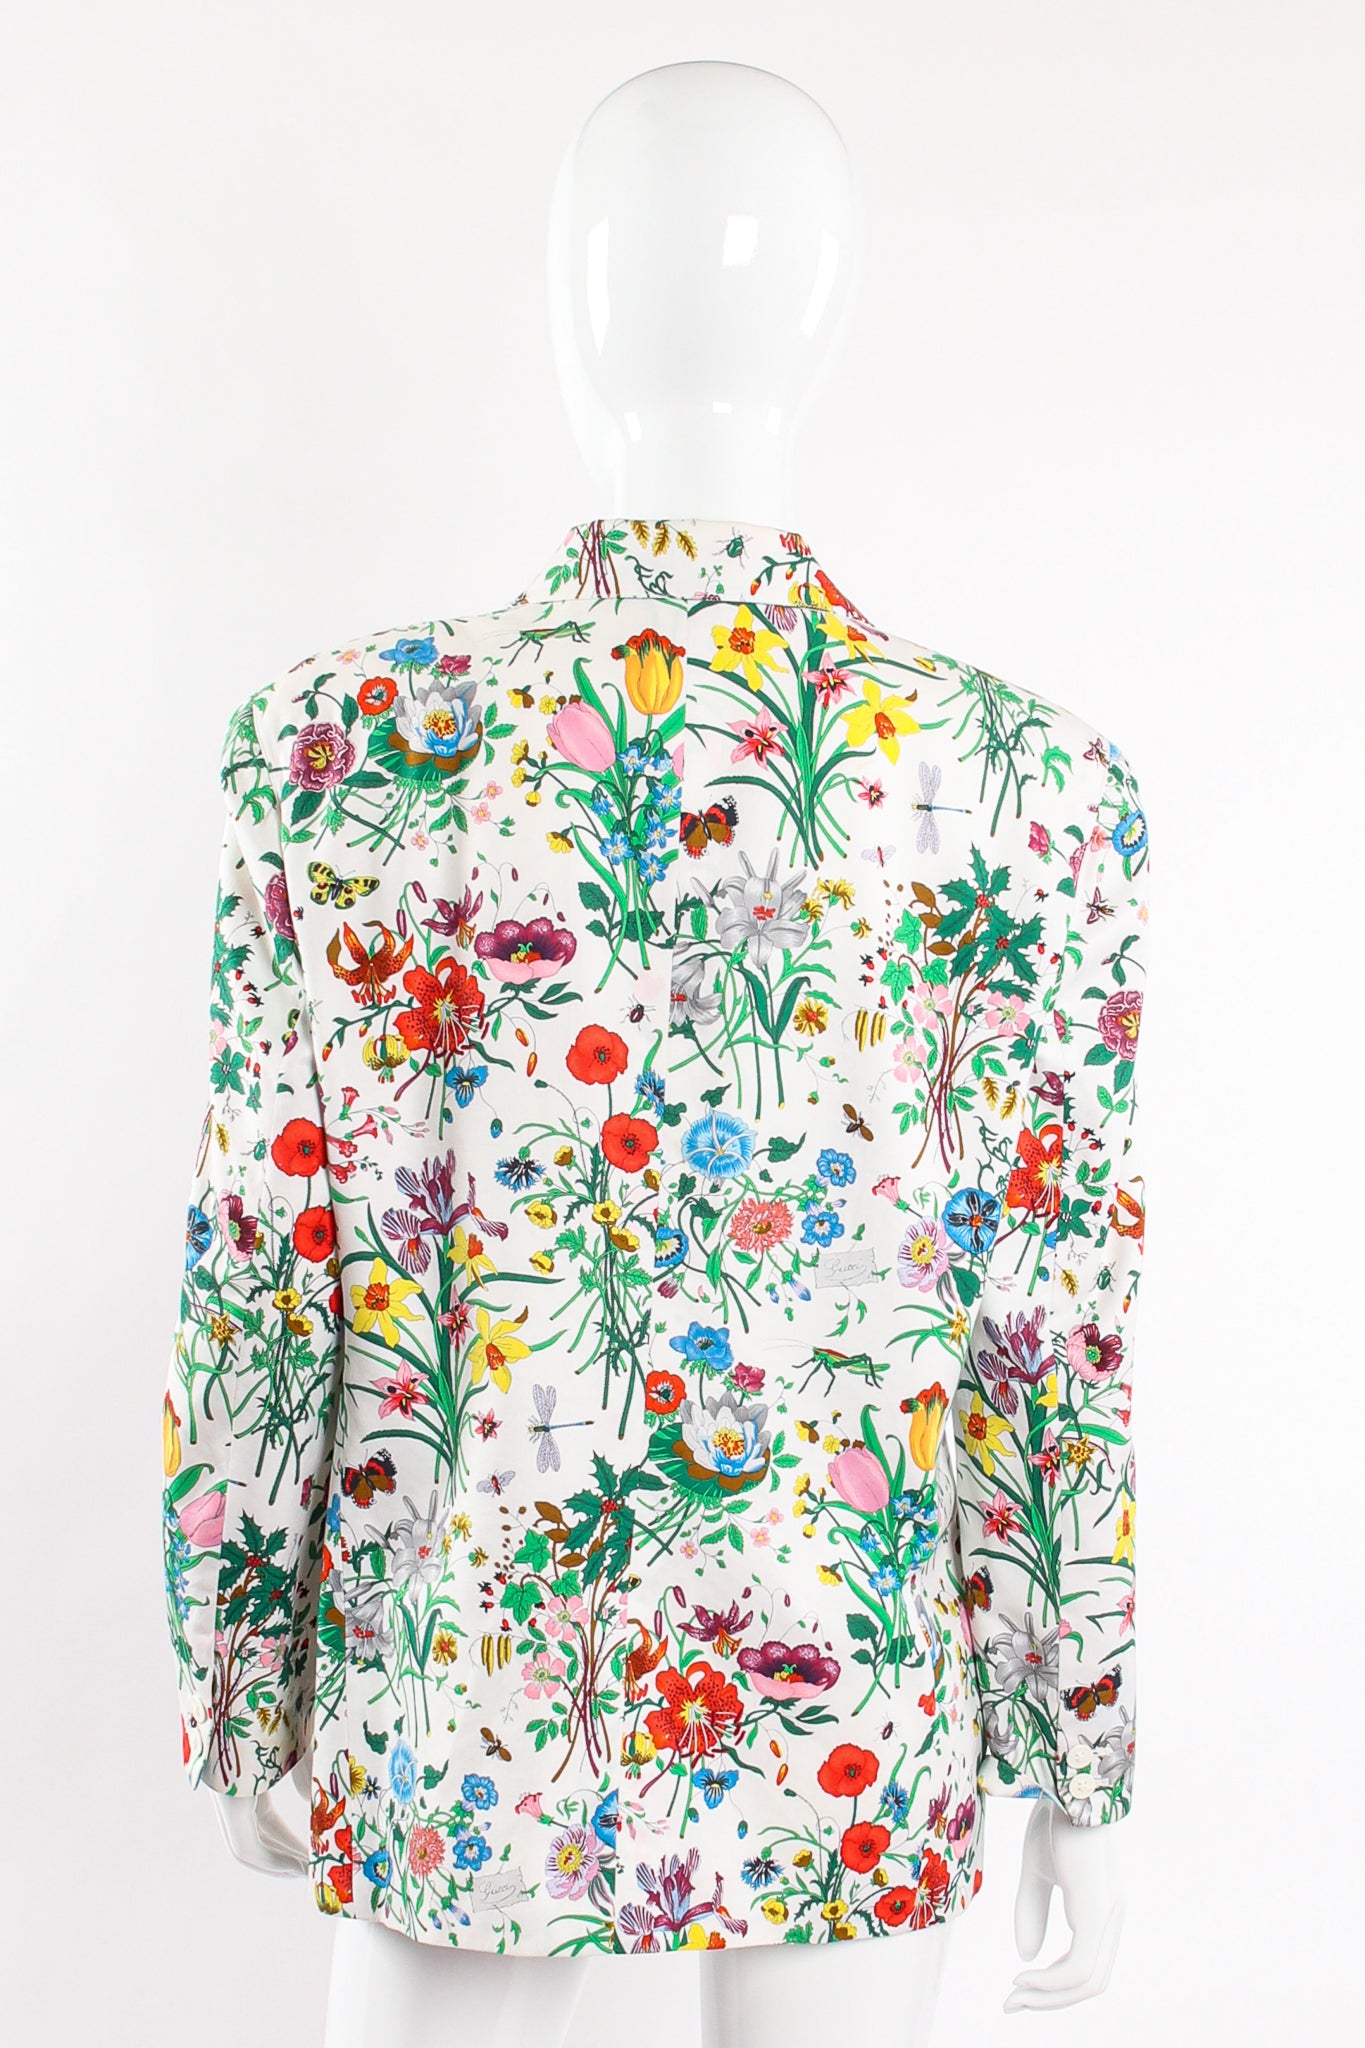 Vintage Gucci Iconic Flora Print Jacket on Mannequin back at Recess Los Angeles